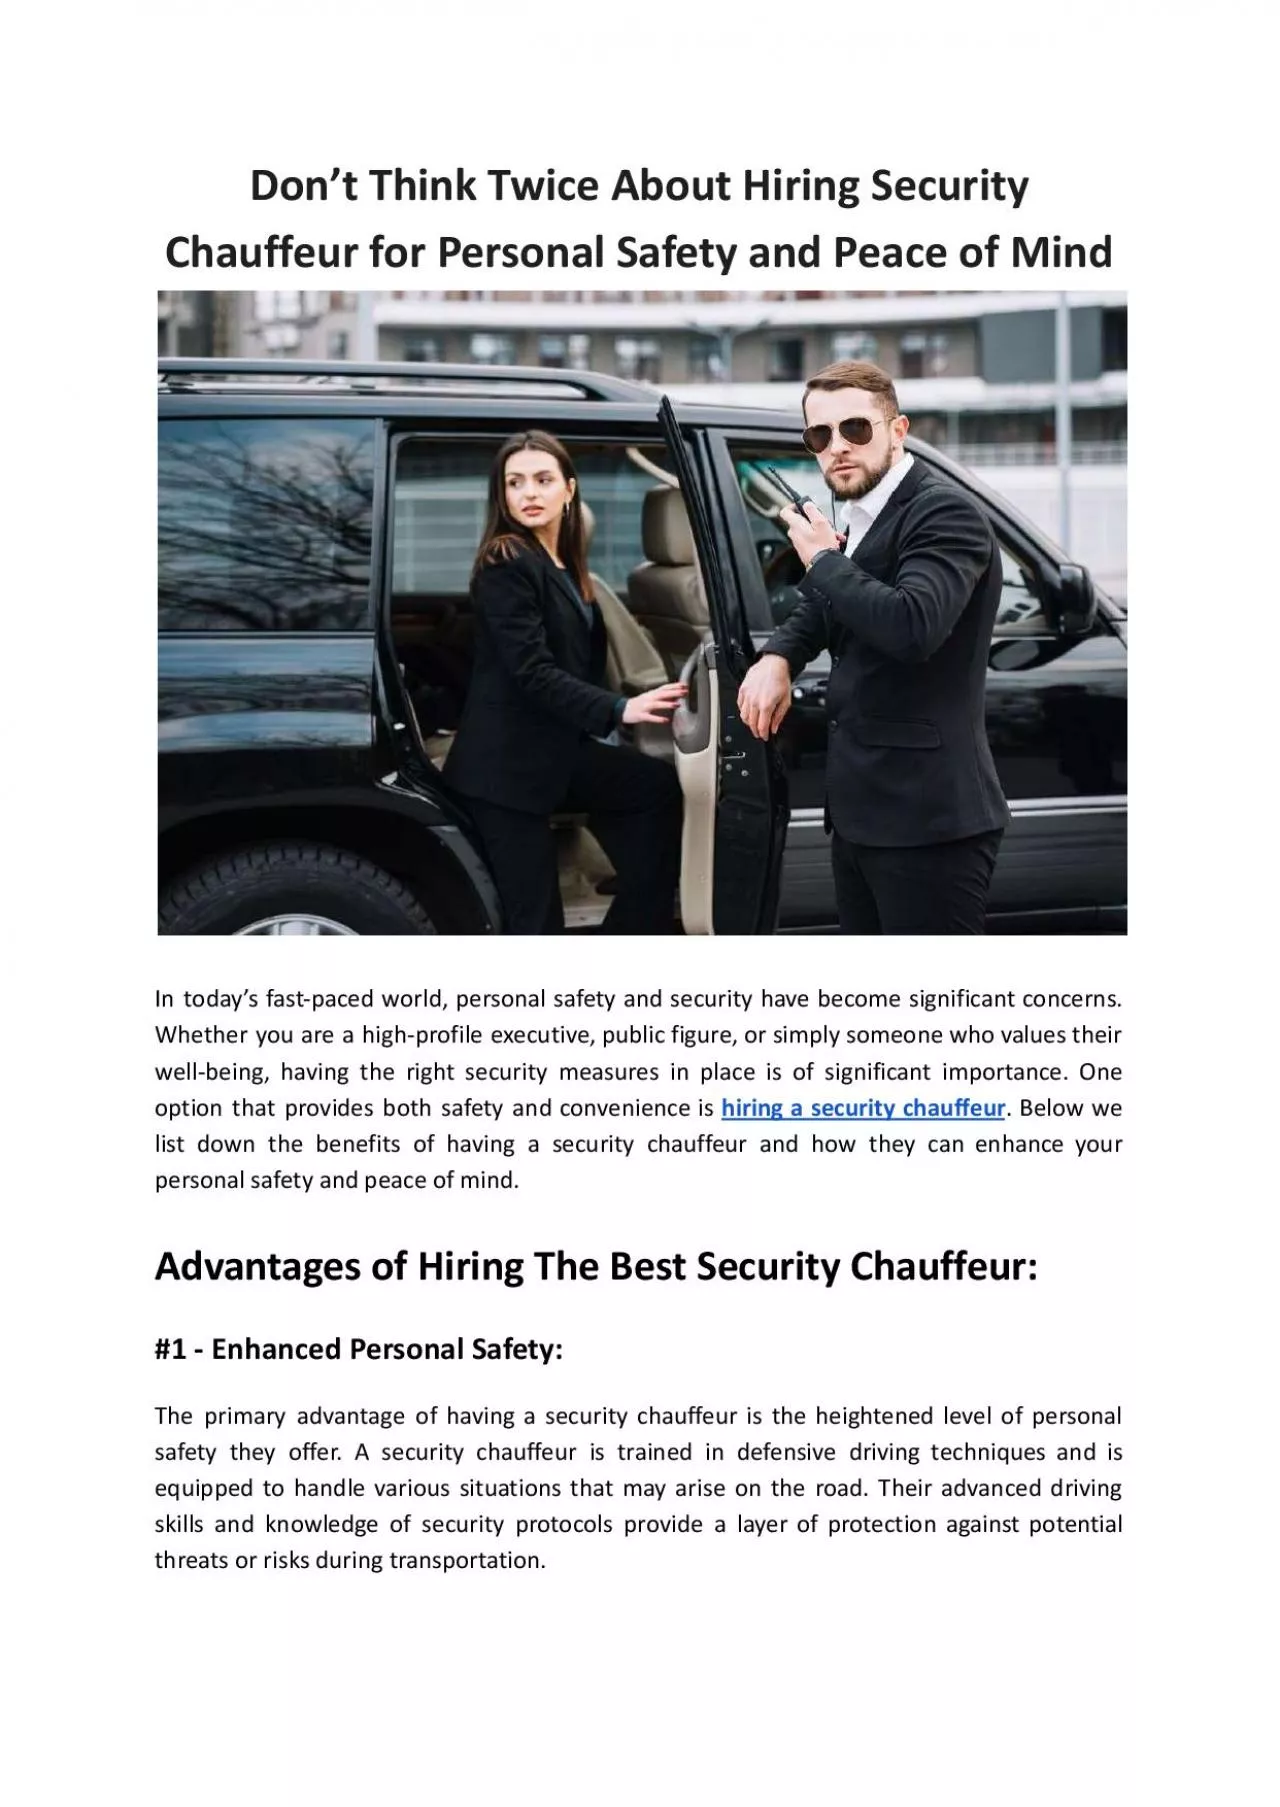 Don’t Think Twice About Hiring Security Chauffeur for Personal Safety and Peace of Mind